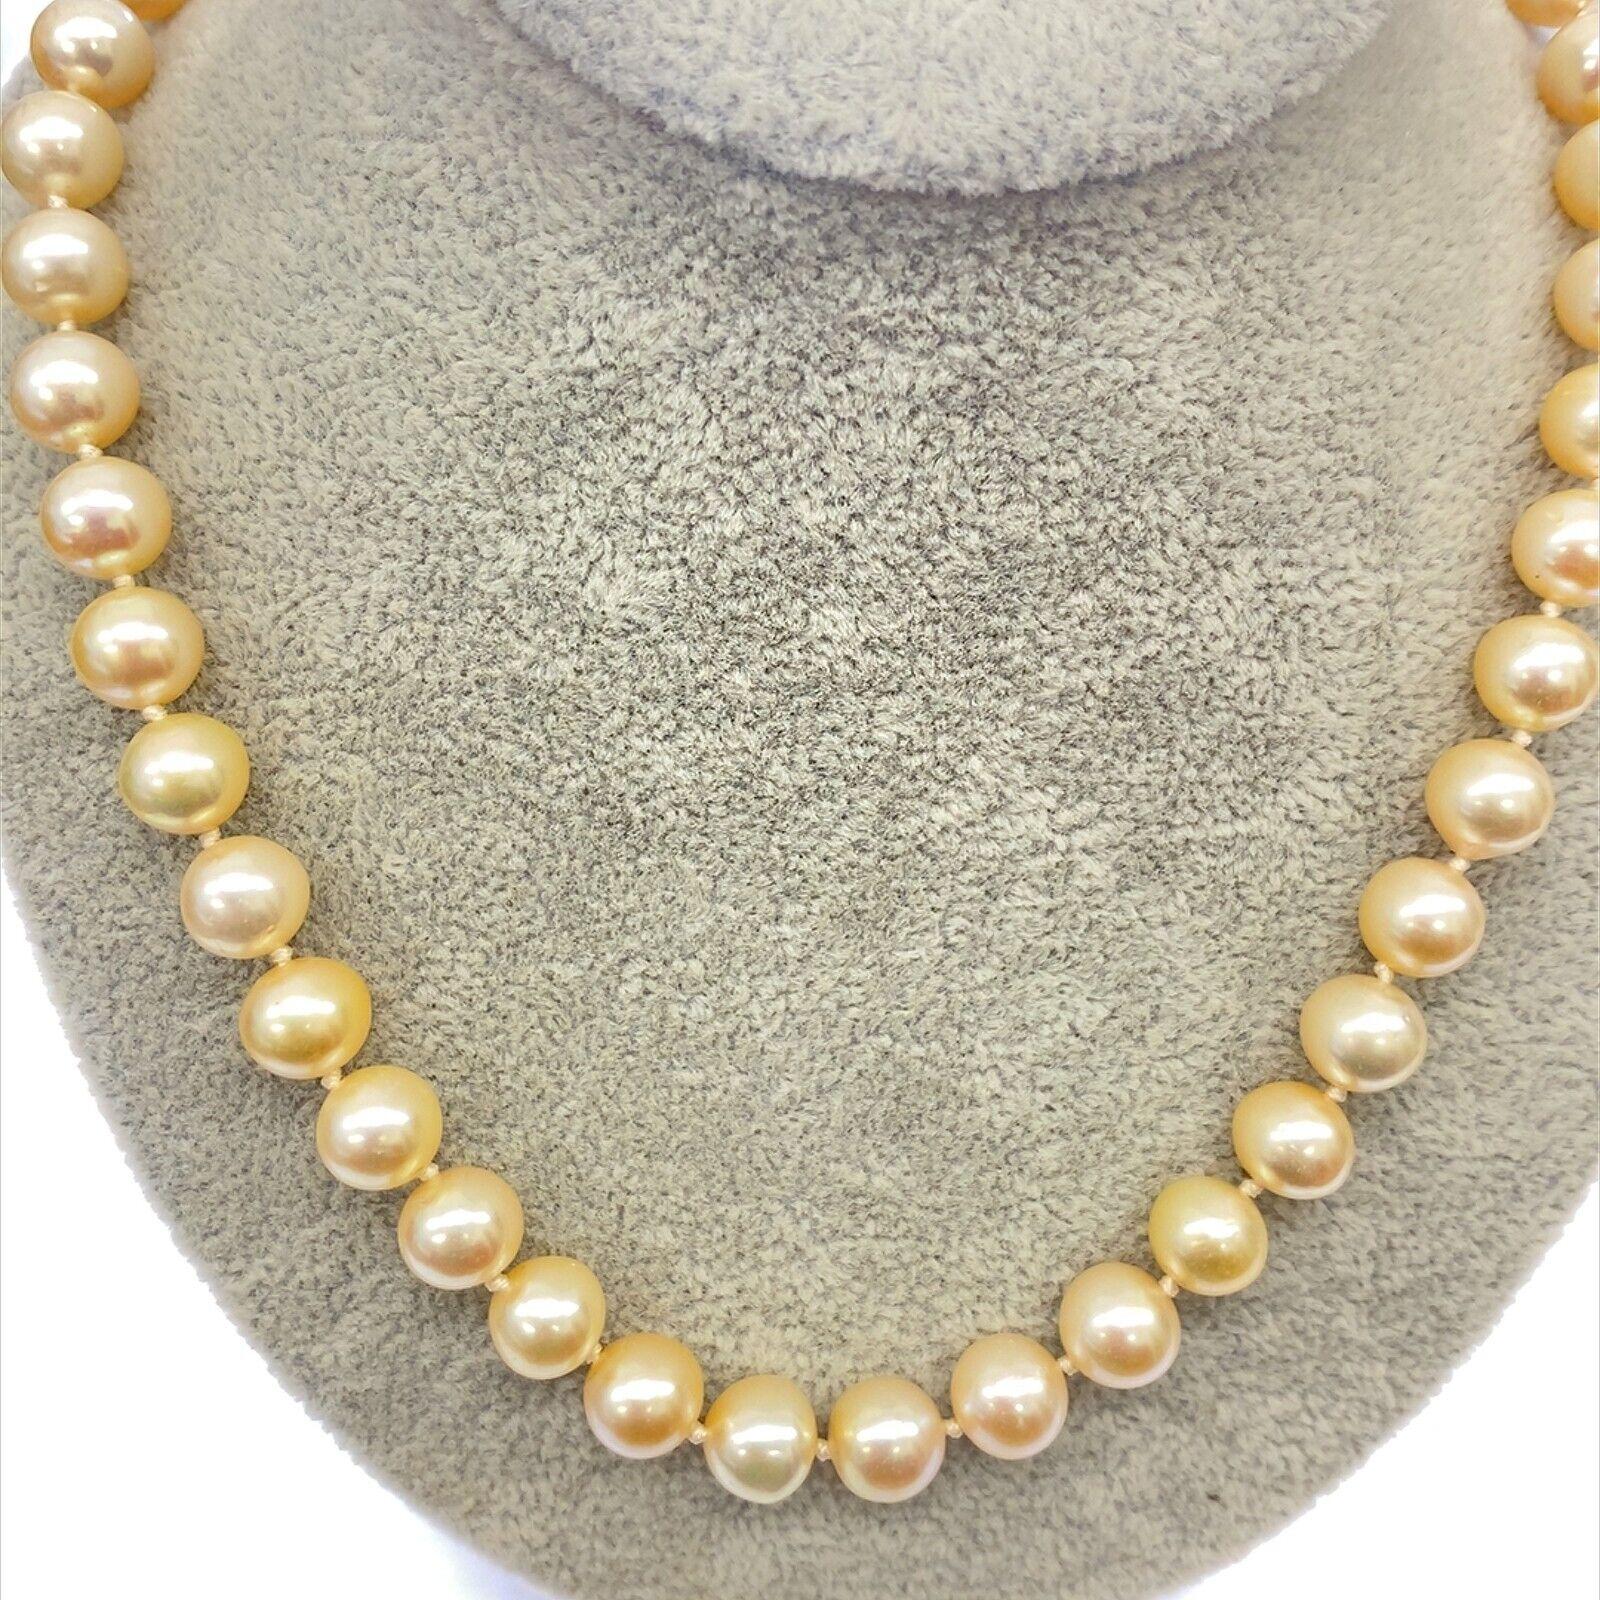 A beautiful, unique and feminine pearl necklace. 8mm white freshwater cultured pearls are threaded onto an 18ct yellow gold clasp. These cultured pearls are a classic and versatile choice.

Additional Information: 
Total Gold Weight: 1.5g
Necklace